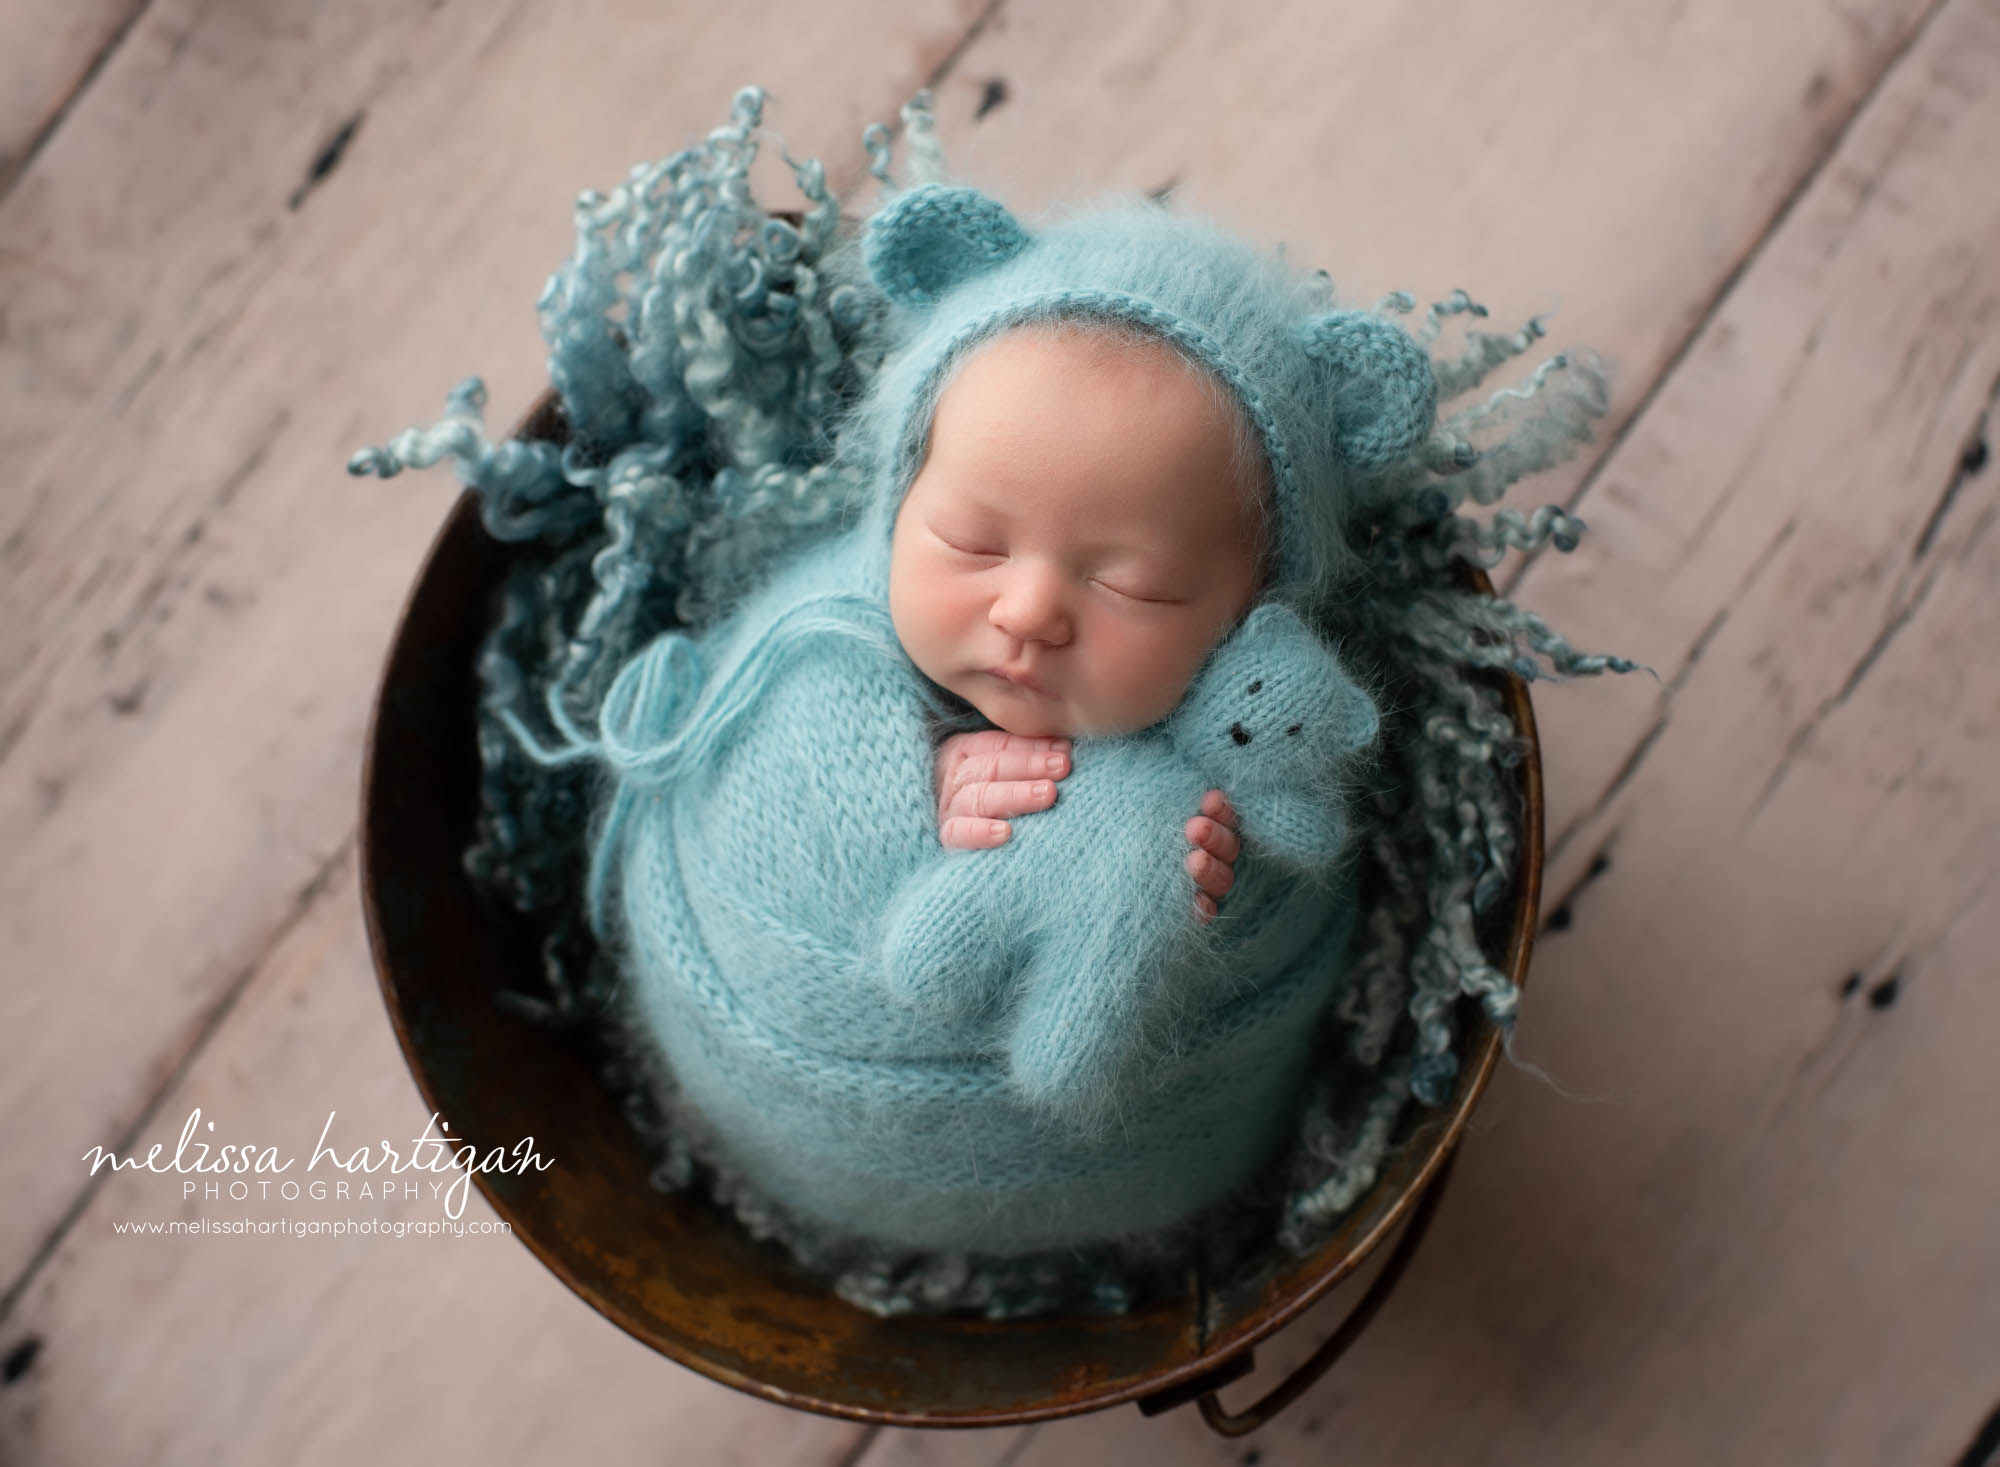 Baby girl wrapped in teal colored knitted wrap with matching bear bonnet and teddy bear Ellington CT newborn photography